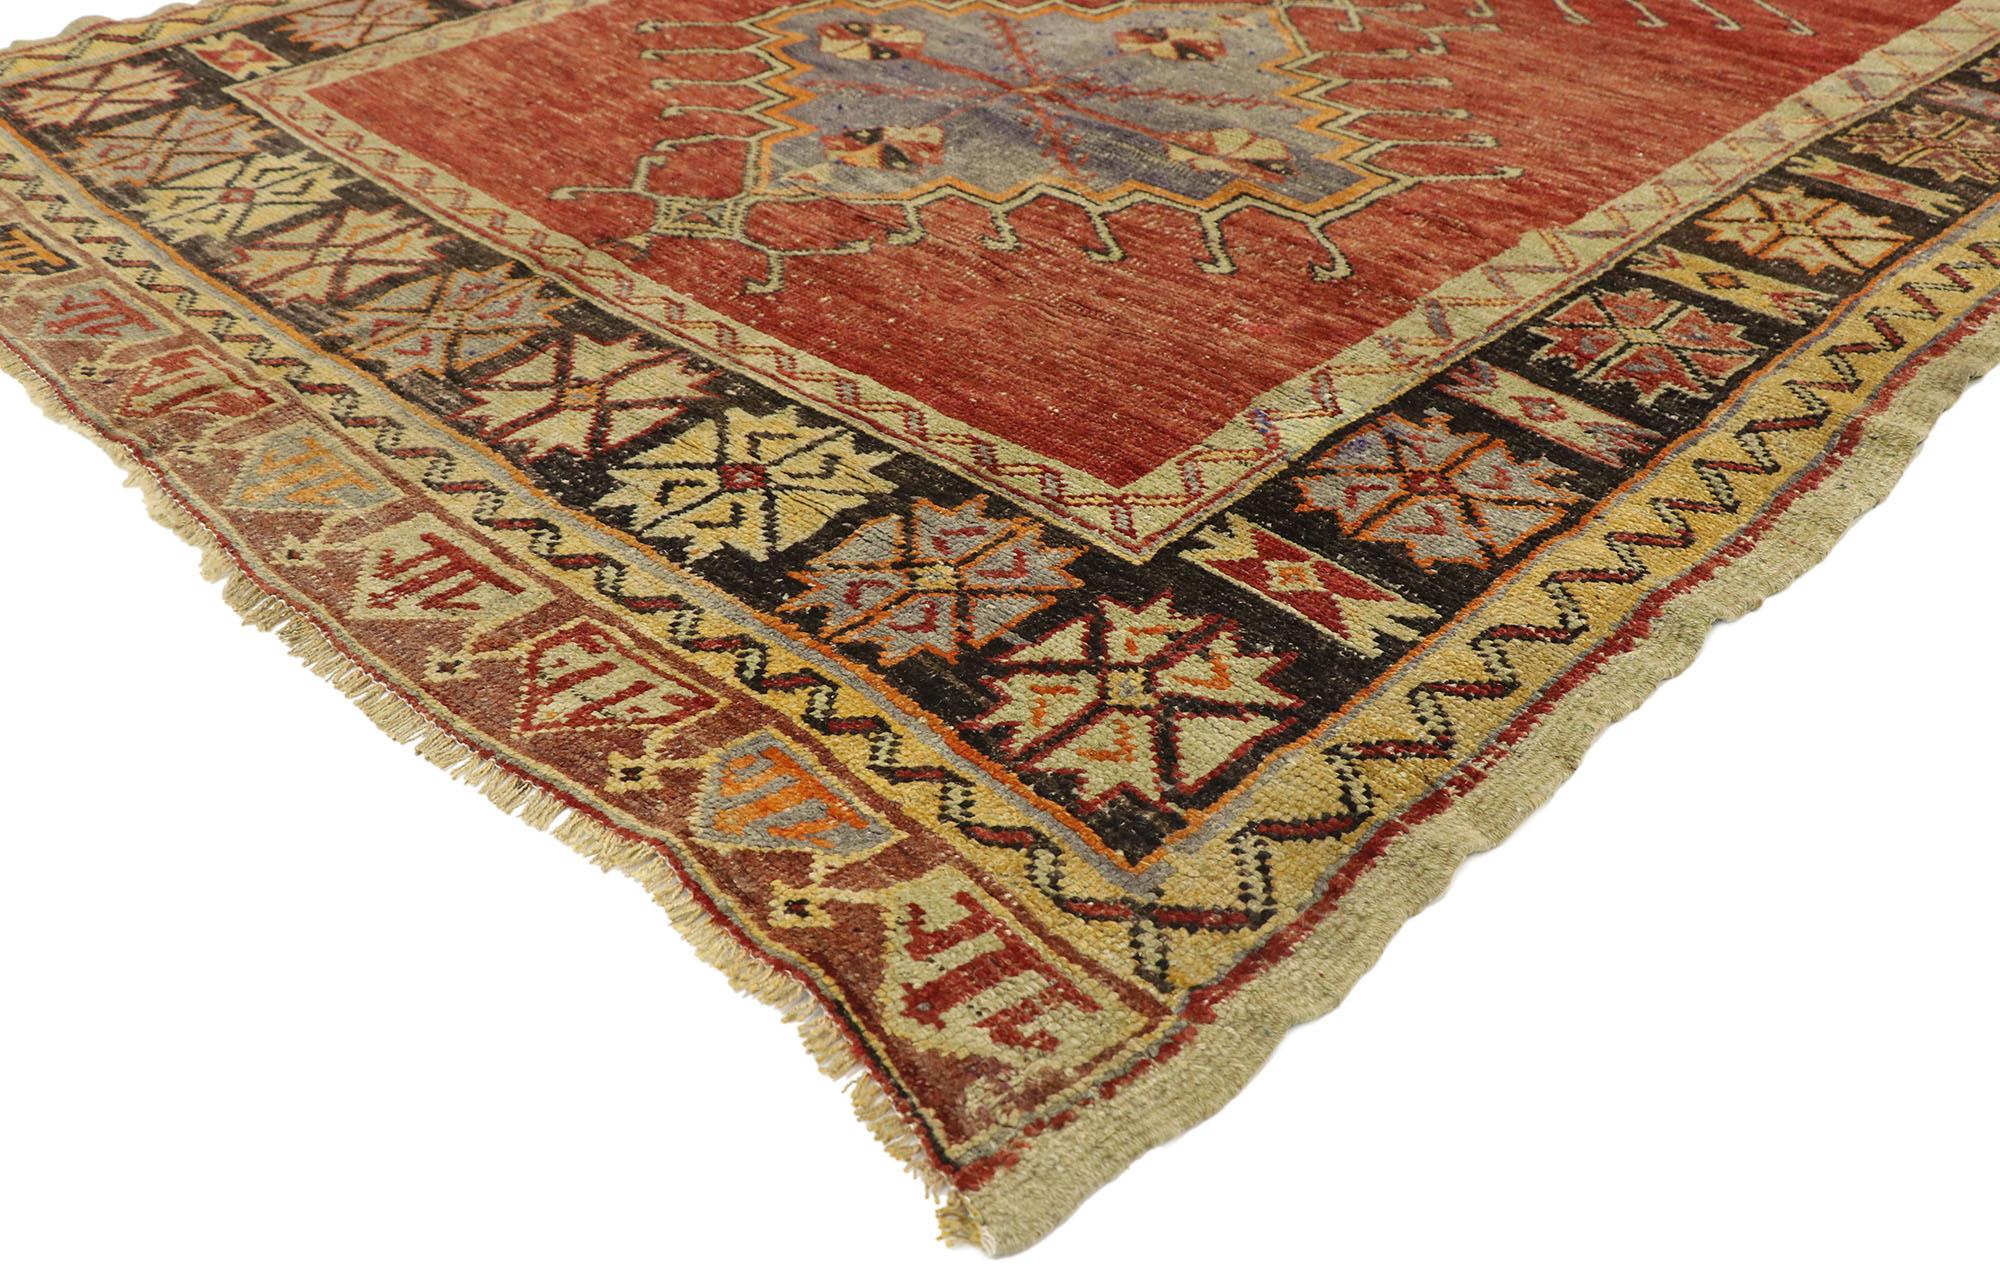 51801, vintage Turkish Oushak Gallery rug with craftsman style, wide hallway runner. This hand knotted wool vintage Turkish Oushak gallery rug features three connected latch-hooked and stepped hexagonal medallions alternating with small hooked